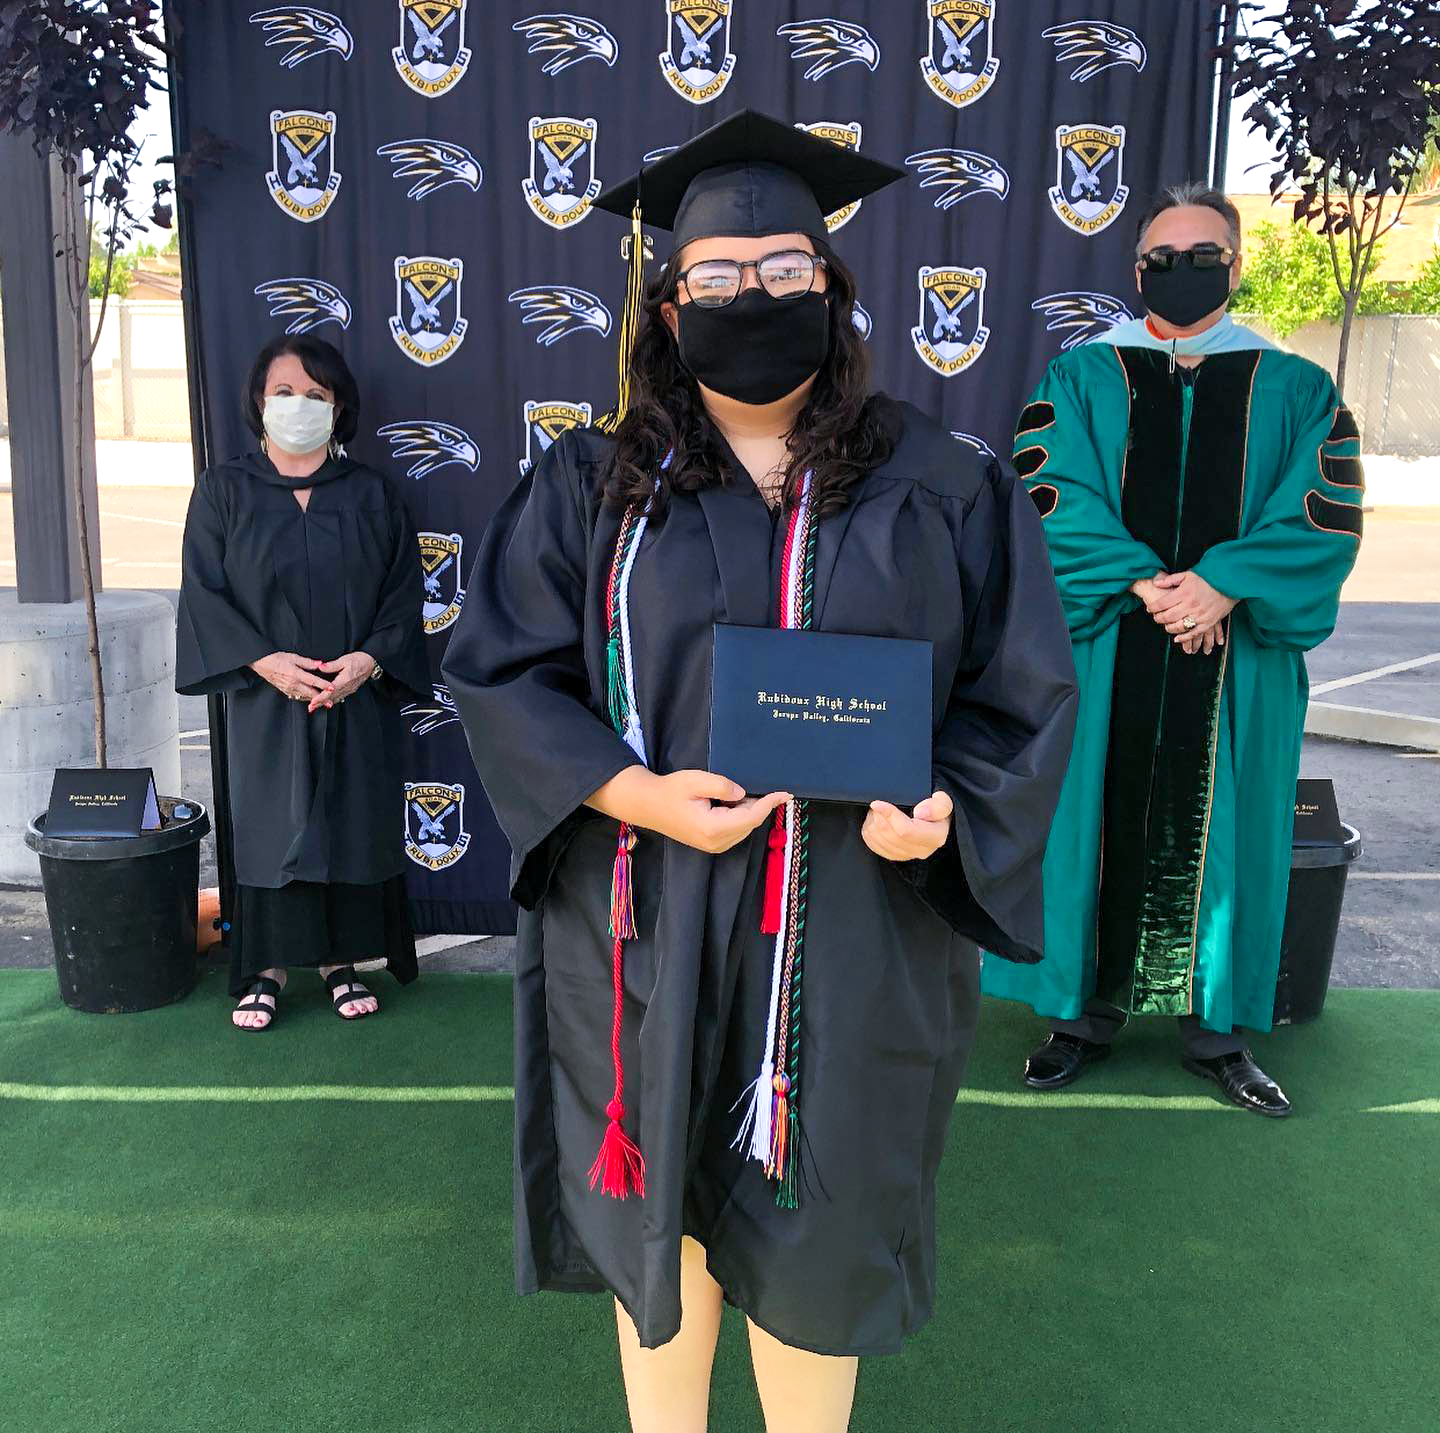 RHS graduate wearing a mask holds diploma; two others in masks stand behind her